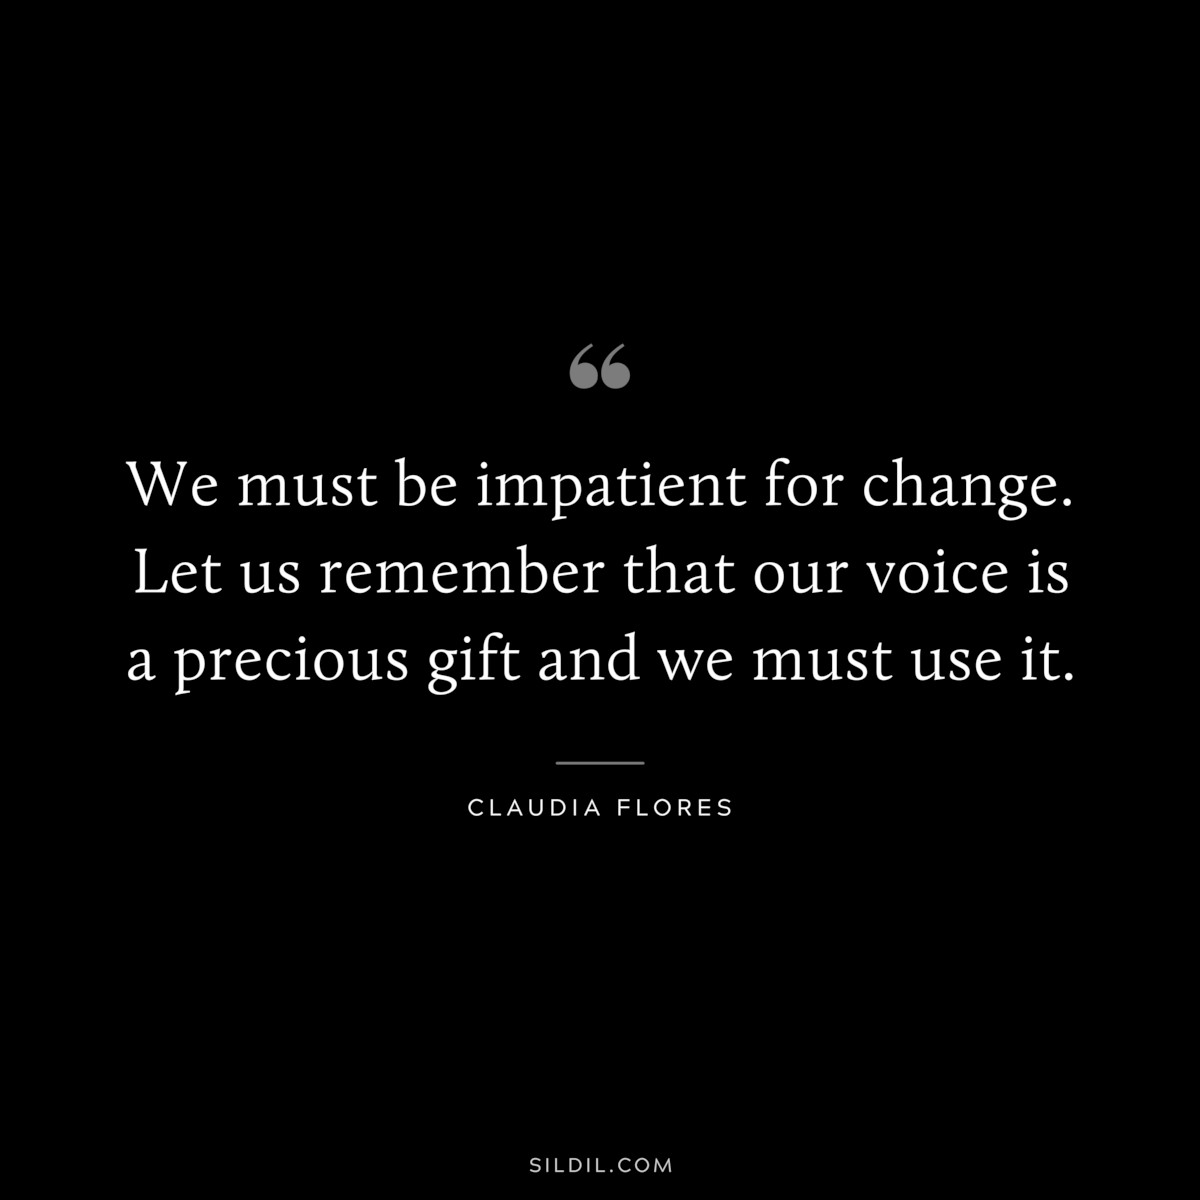 We must be impatient for change. Let us remember that our voice is a precious gift and we must use it. ― Claudia Flores